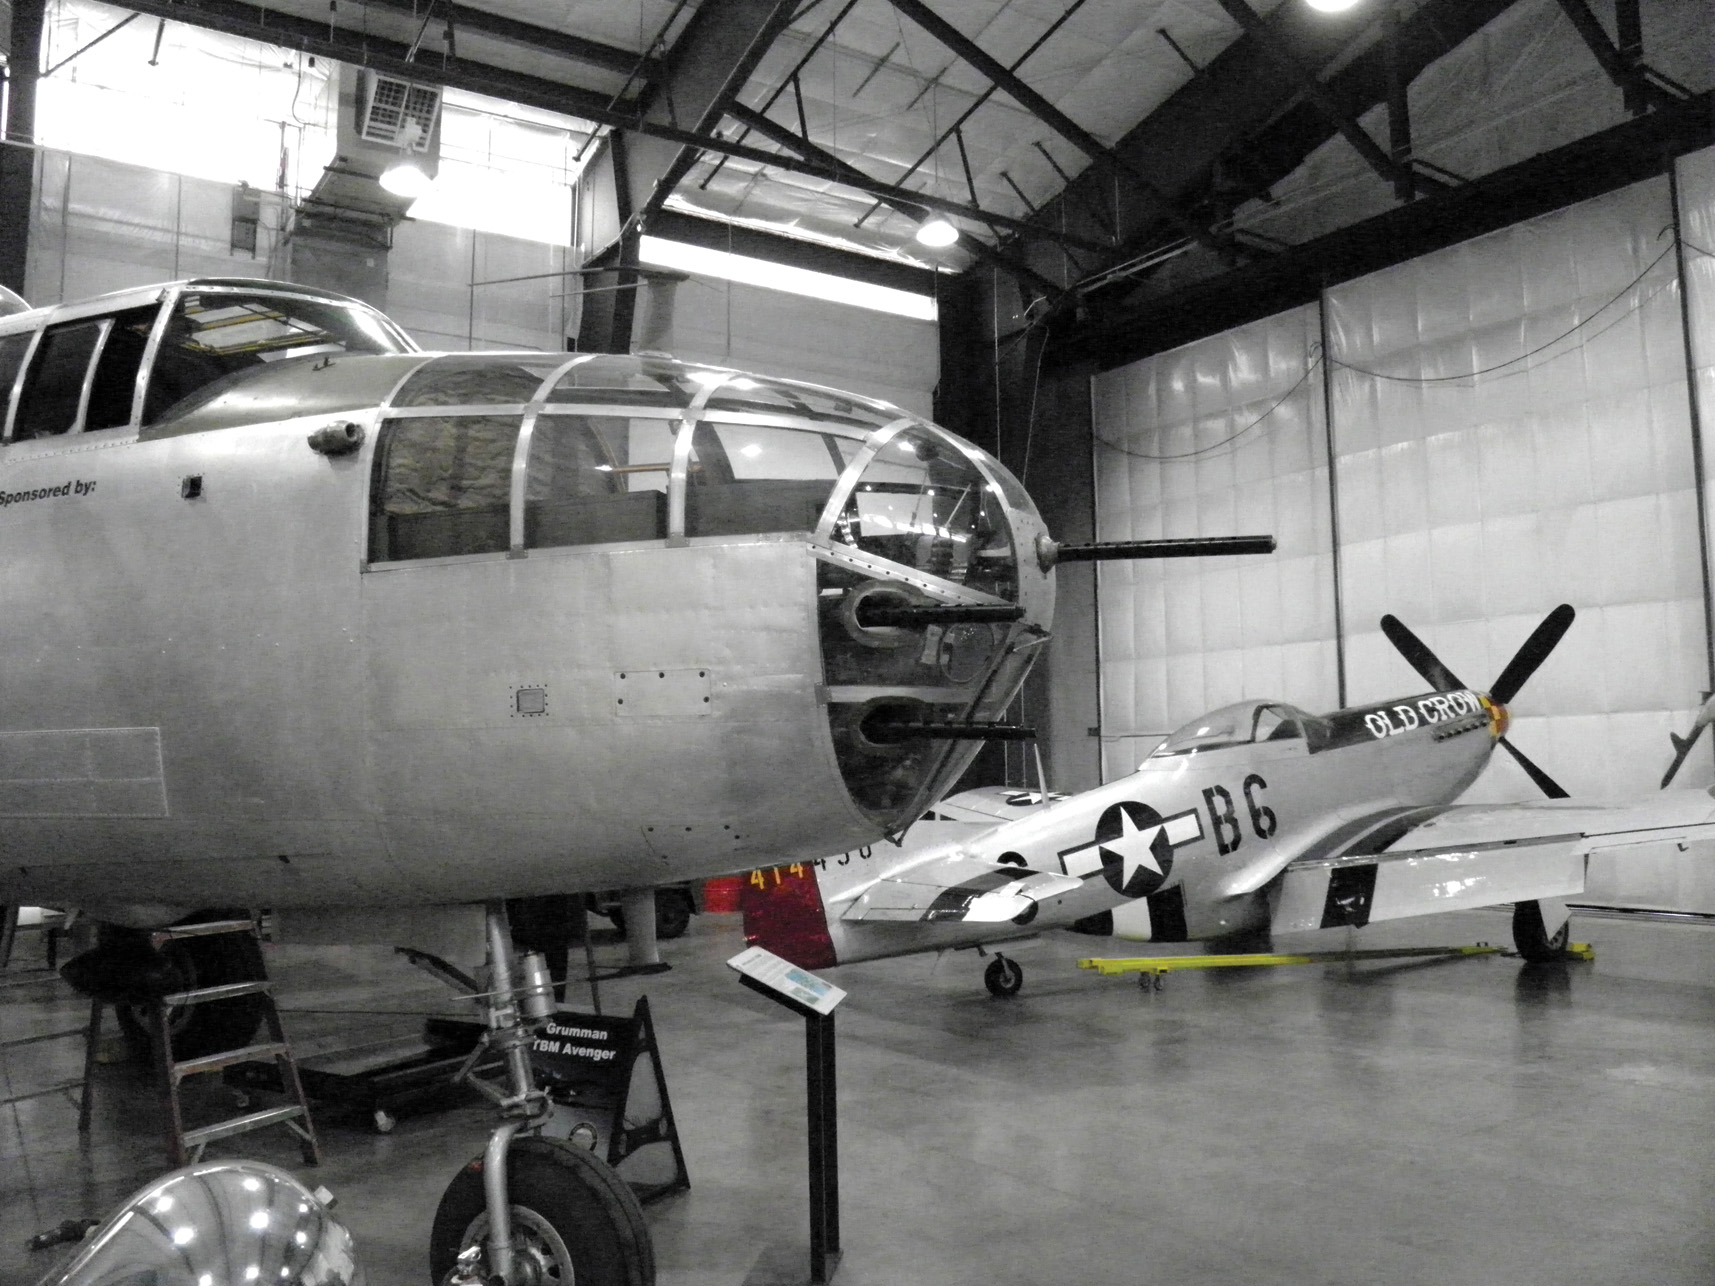 This North American B-25 Mitchell bomber, dubbed In the Mood, has appeared in many war films, including Pearl Harbor. In the background is Old Crow, a North American P-51 Mustang. 